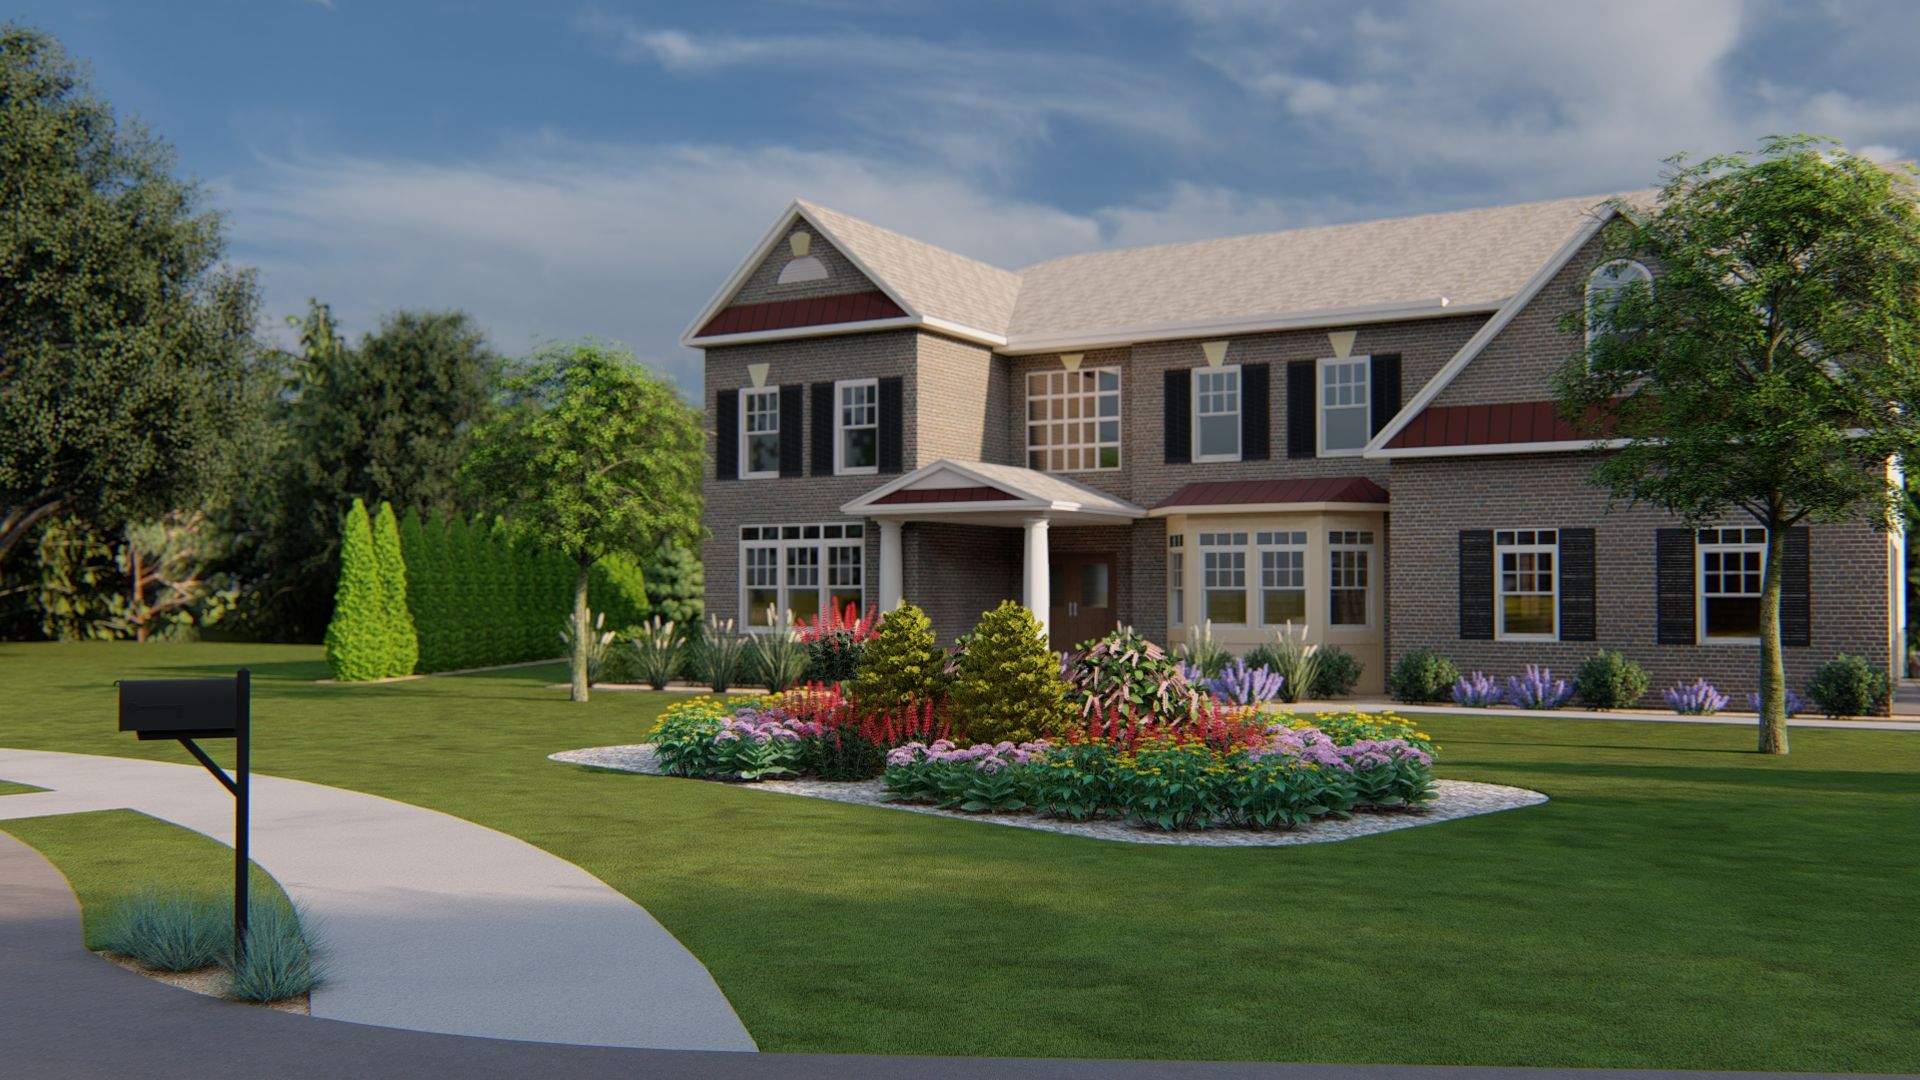 front yard curb appeal with large trees, emerald green arborvitae and colorful flower beds at the front entry